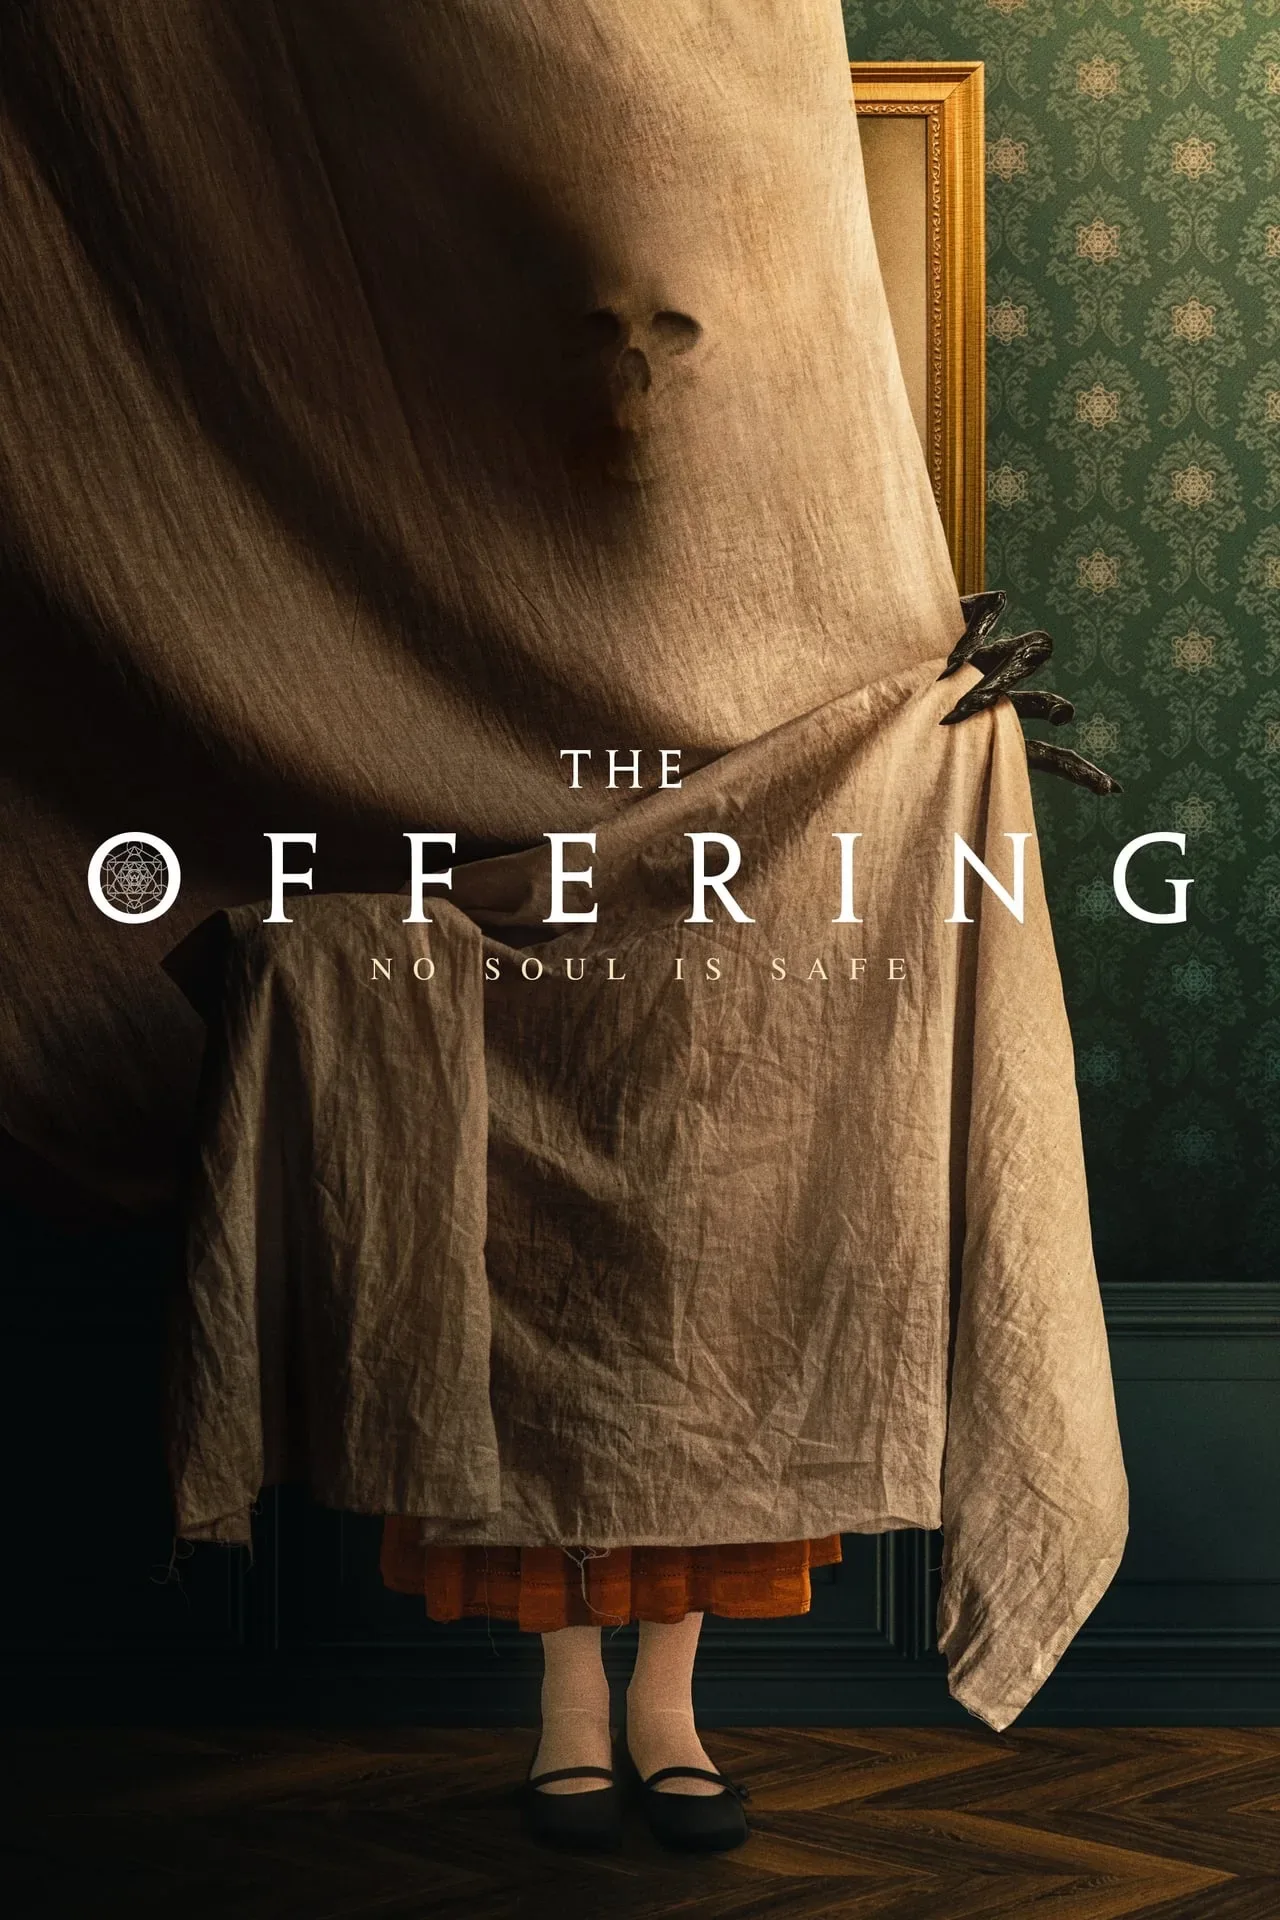 In the movie, The Offering - The son of a Hasidic funeral director returns home with his pregnant wife in hopes of reconciling with his father. Little do they know that an ancient evil lurking inside a mysterious corpse has sinister plans for their unborn child.